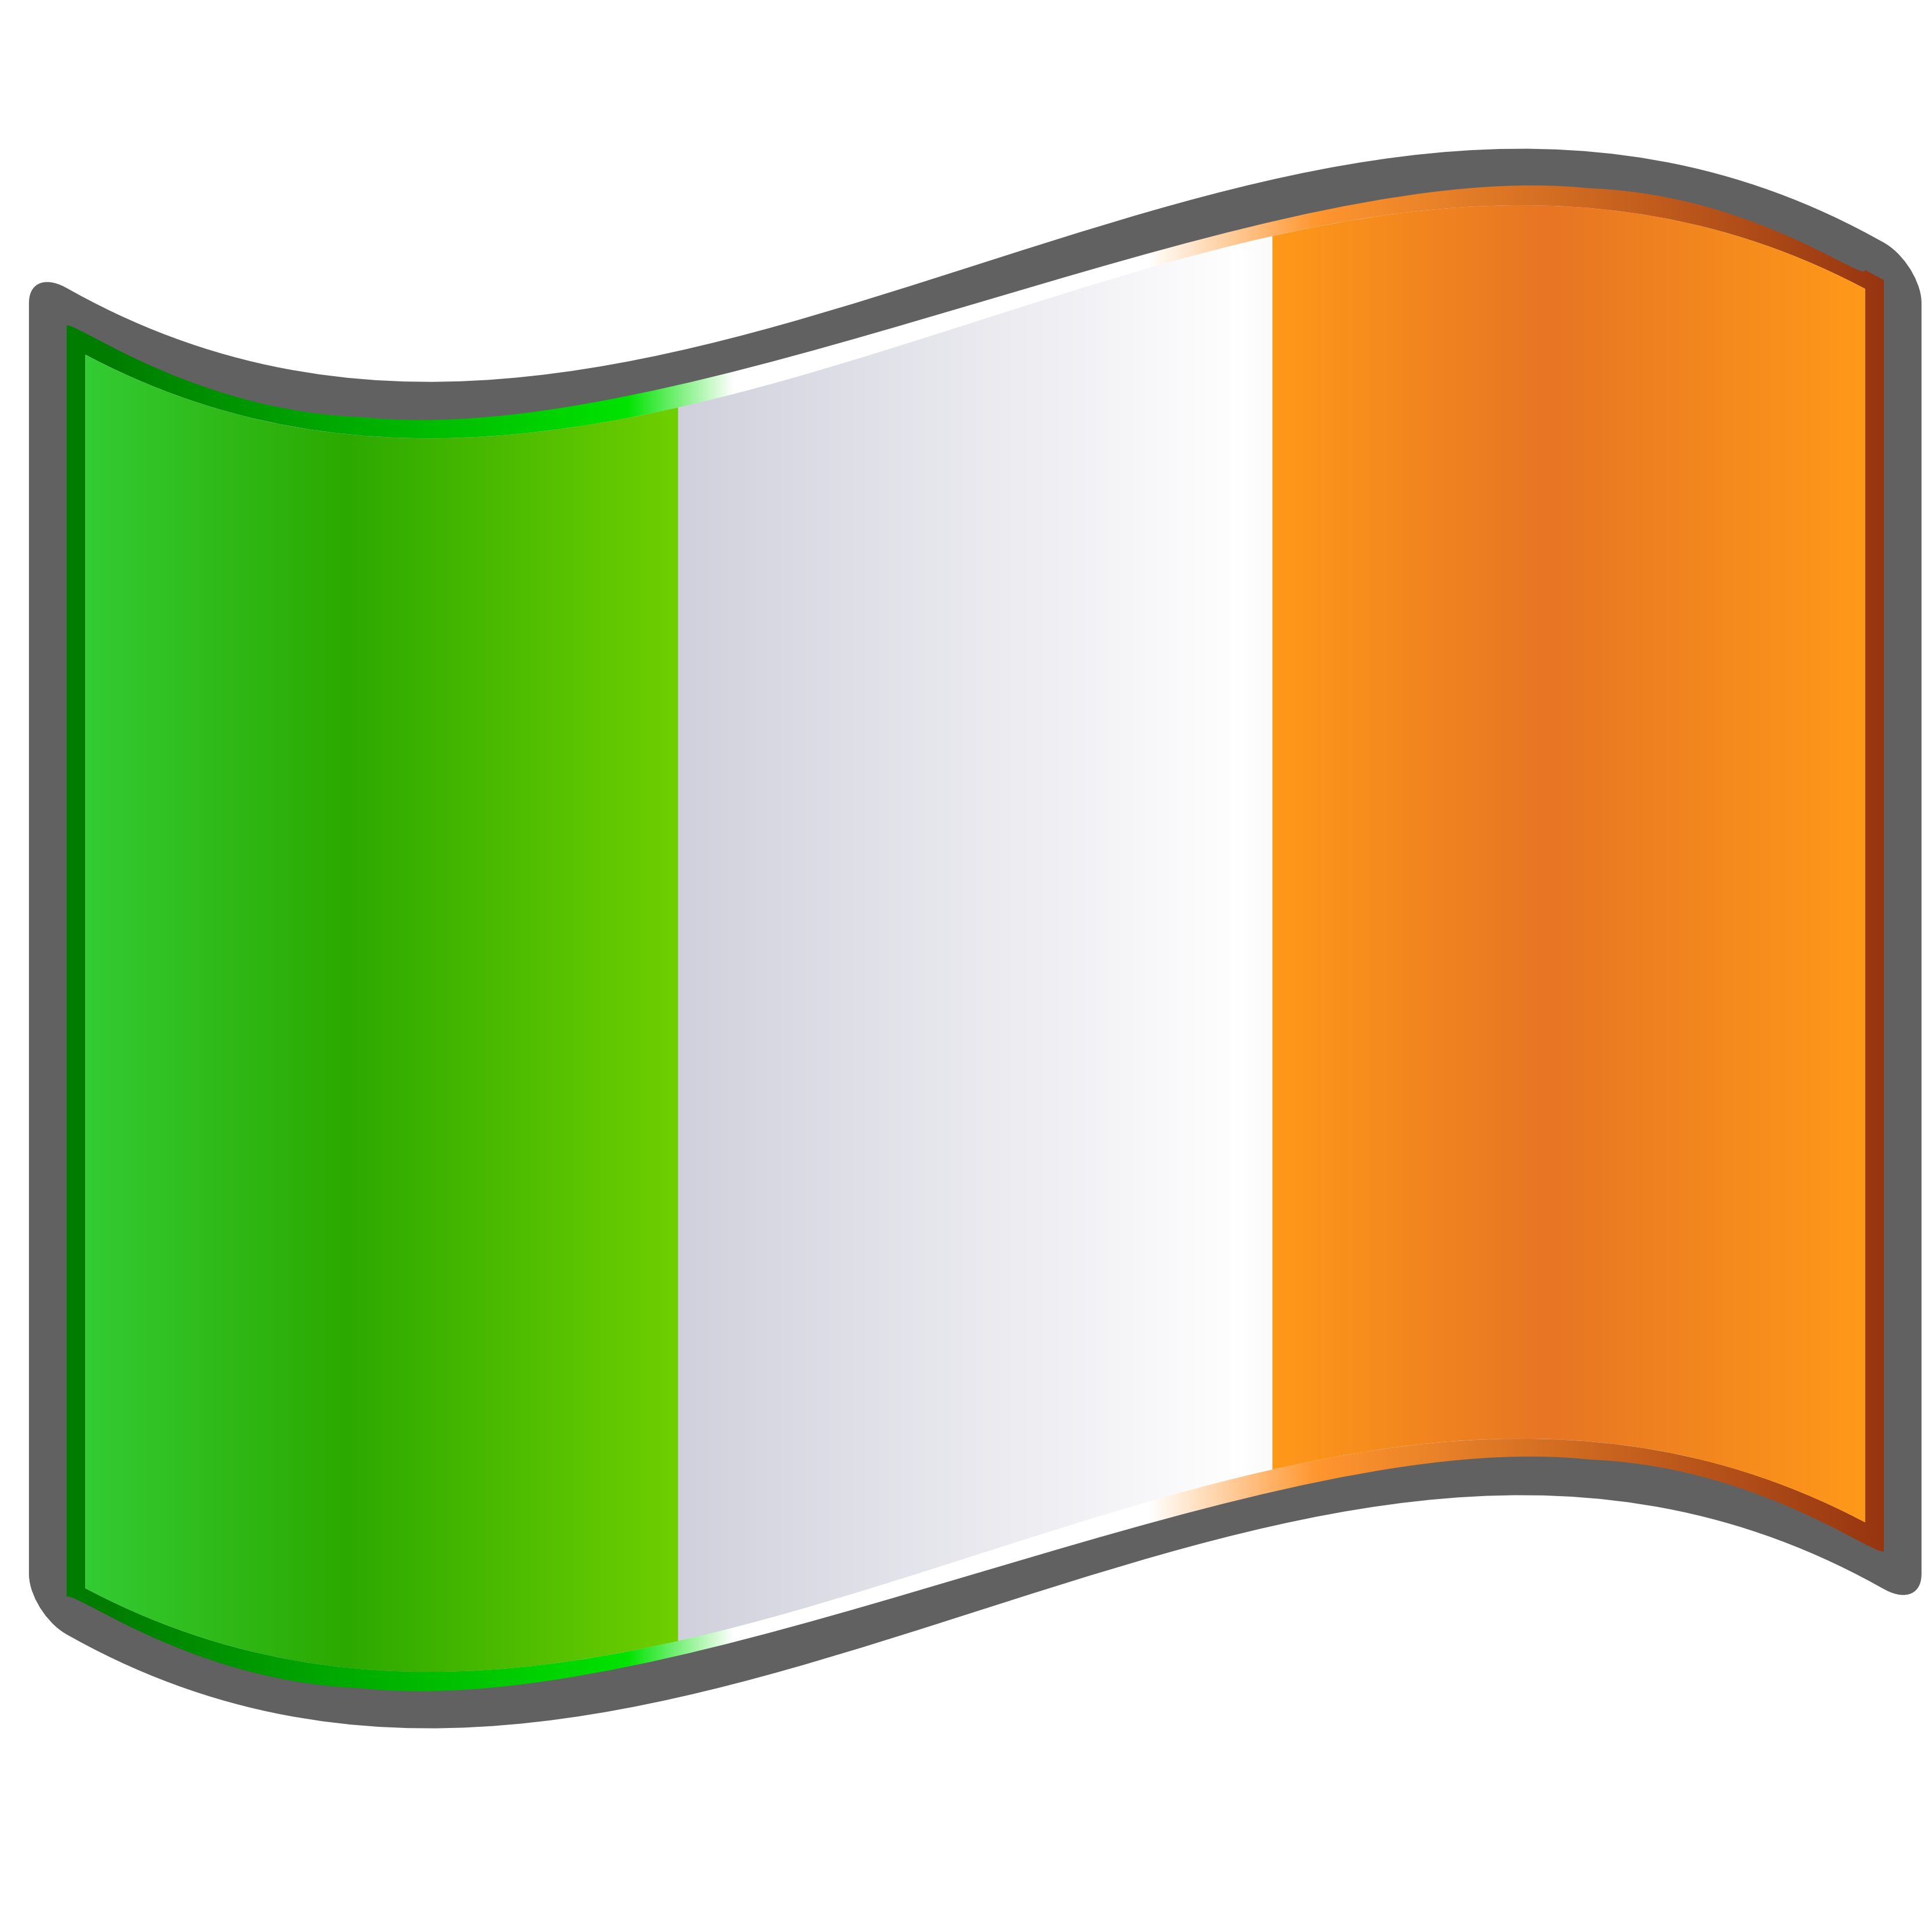 Nuvola Irish Flag Flags 2011 Clip Art SVG openclipart.org commons ...